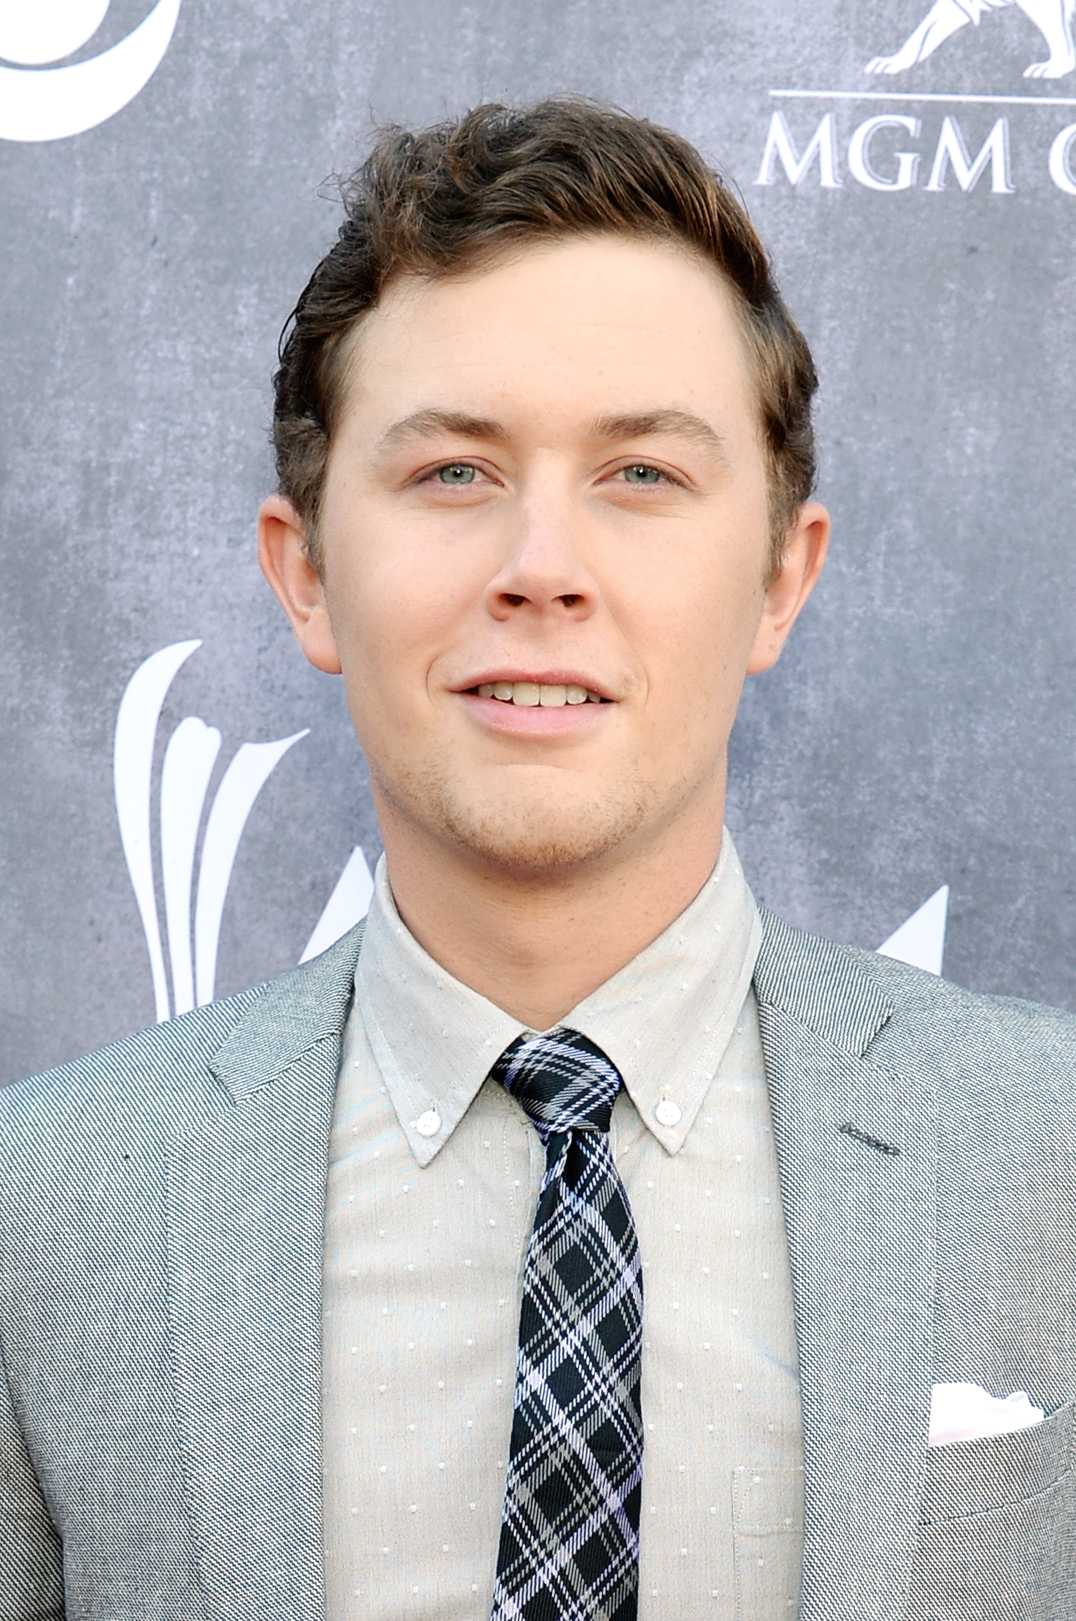 Scotty McCreery attends the 49th Annual Academy of Country Music Awards at the MGM Grand Garden Arena on April 6, 2014 in Las Vegas.